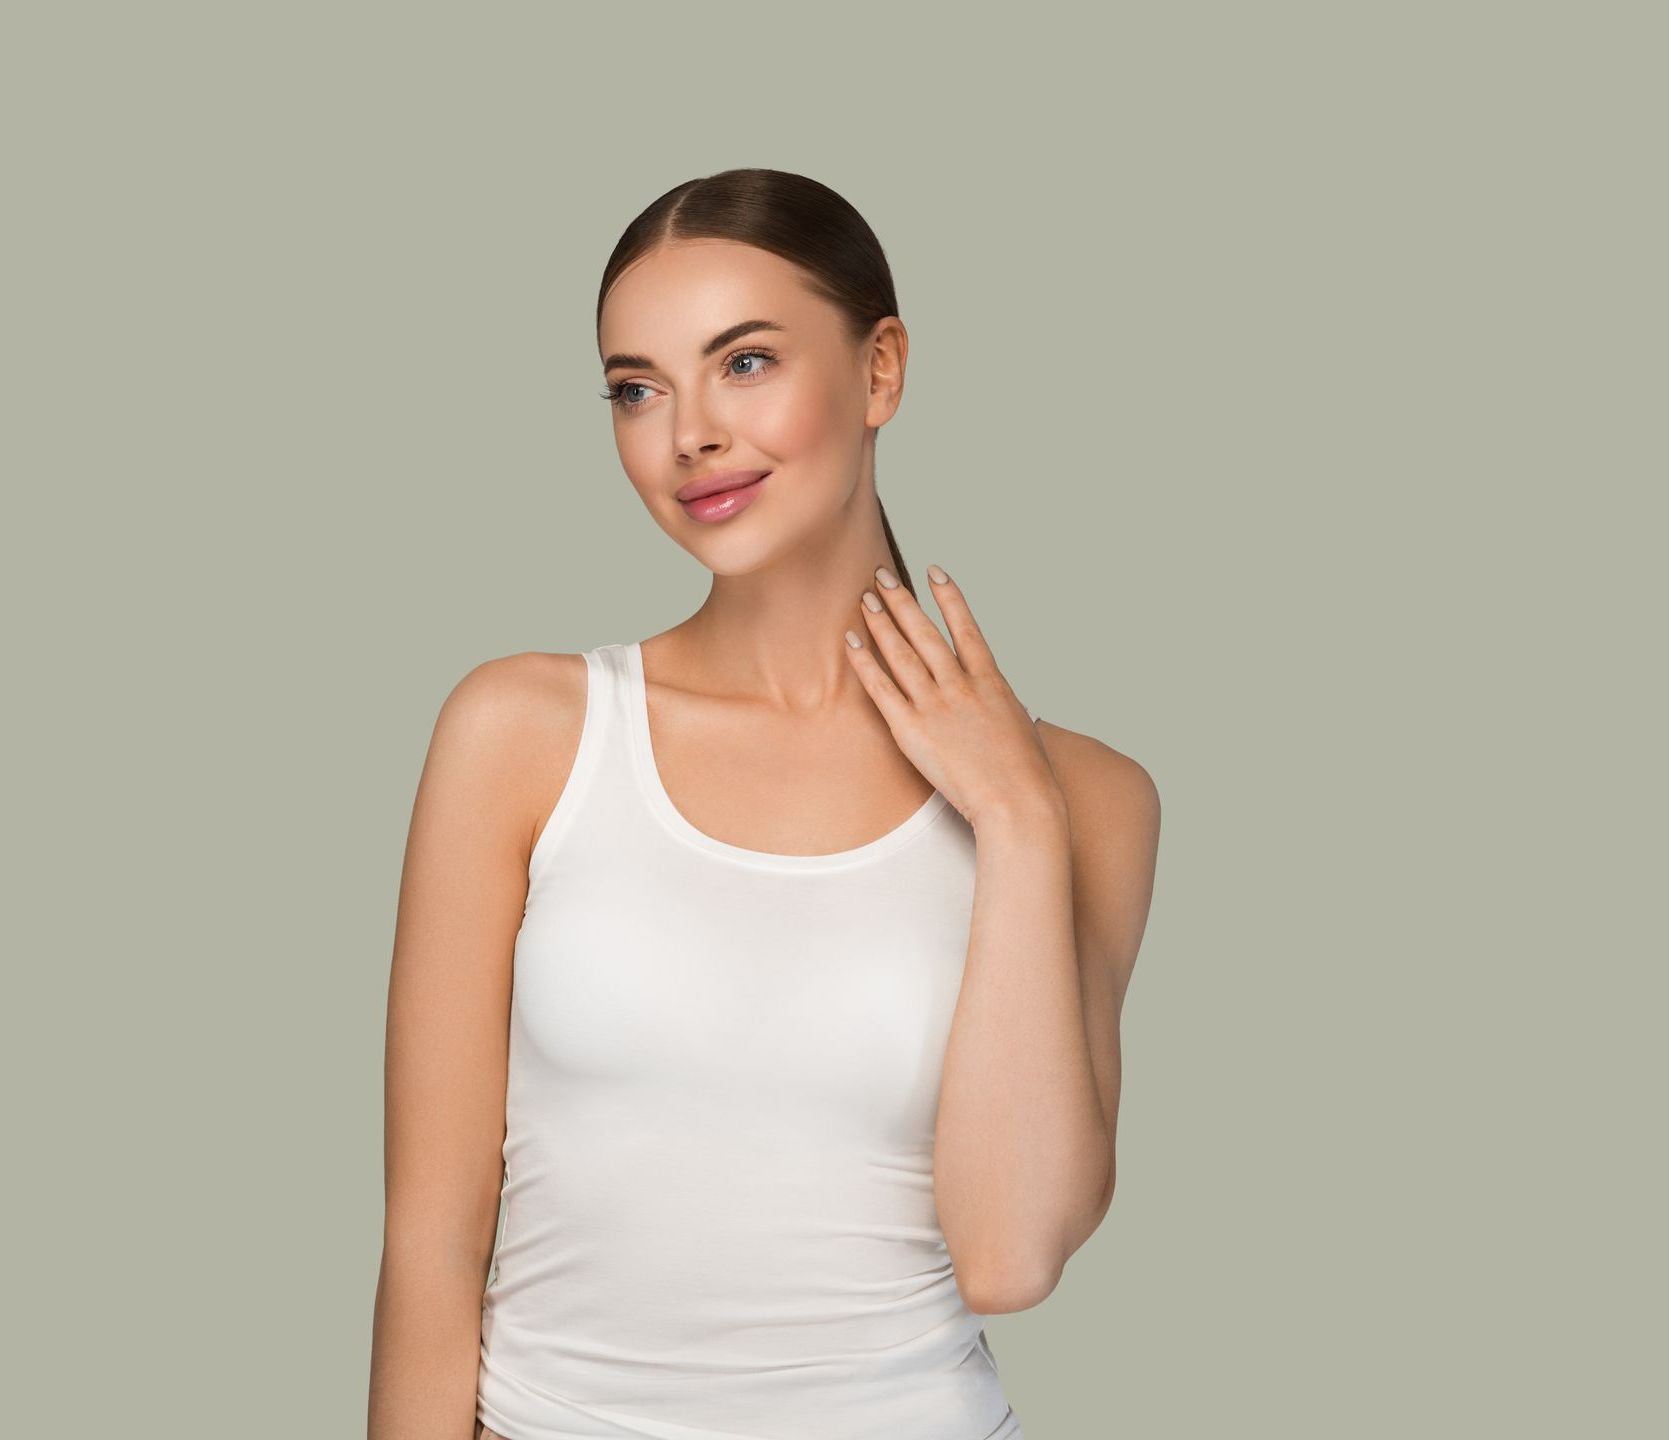 the woman is wearing a white tank top and holding her hand to her neck .